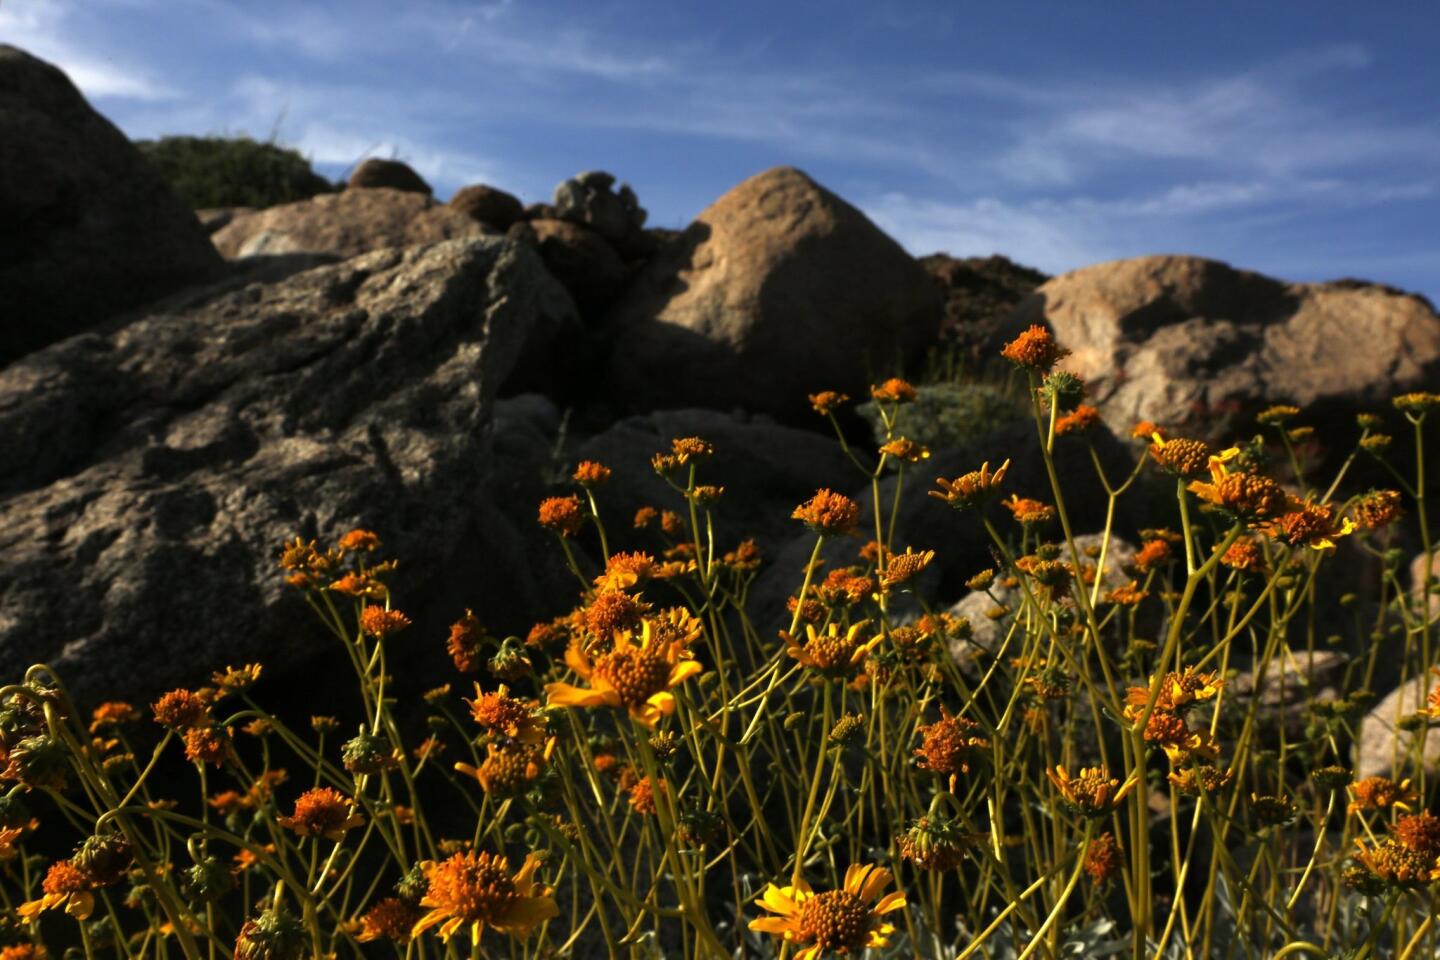 The colorful brittle bush blooms reach for the sky in Anza-Borrego Desert State Park.